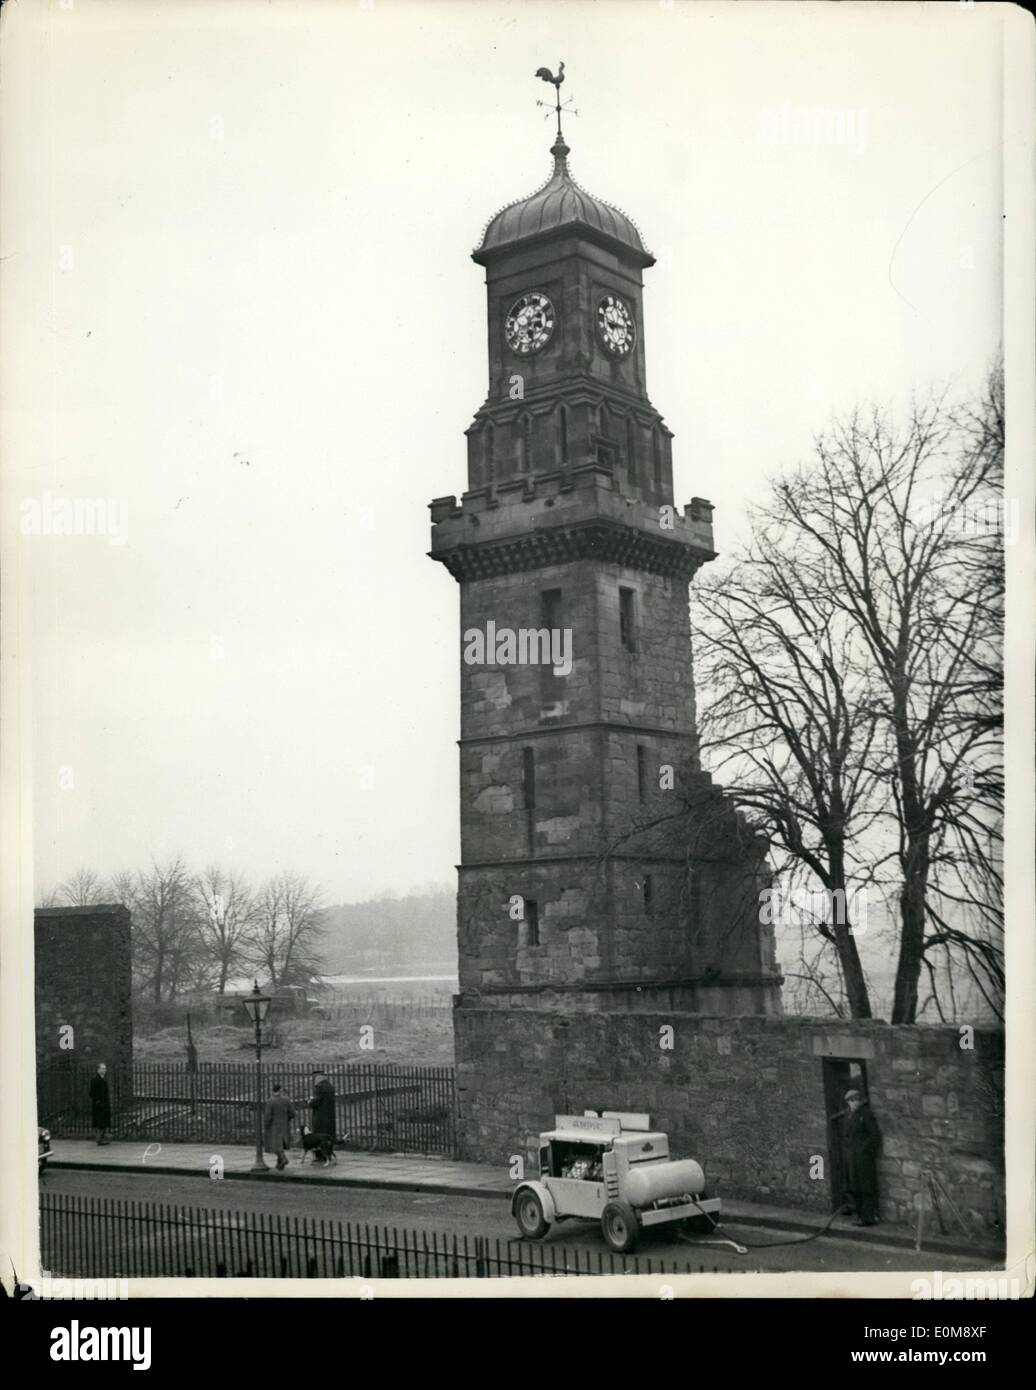 Jan. 01, 1954 - Gelignite Used To Destroy Ancient Steeple In Hamilton - Scotland: About 1,000 people, including many schoolchildren watched the destruction of the Old Tolbooth Steeple, in Muir Street, Hamilton, Scotland, recently - with the aid of gelignite charges. The steeple bell had tolled out the hours for 312 years - but the foundations of the steeple were eaten away and it menaced a nearby housing scheme. Photo Shows:- View of the steeple as preparations are made to set off the gelignite charges - to bring it down - in Hamilton, Scotland. Stock Photo